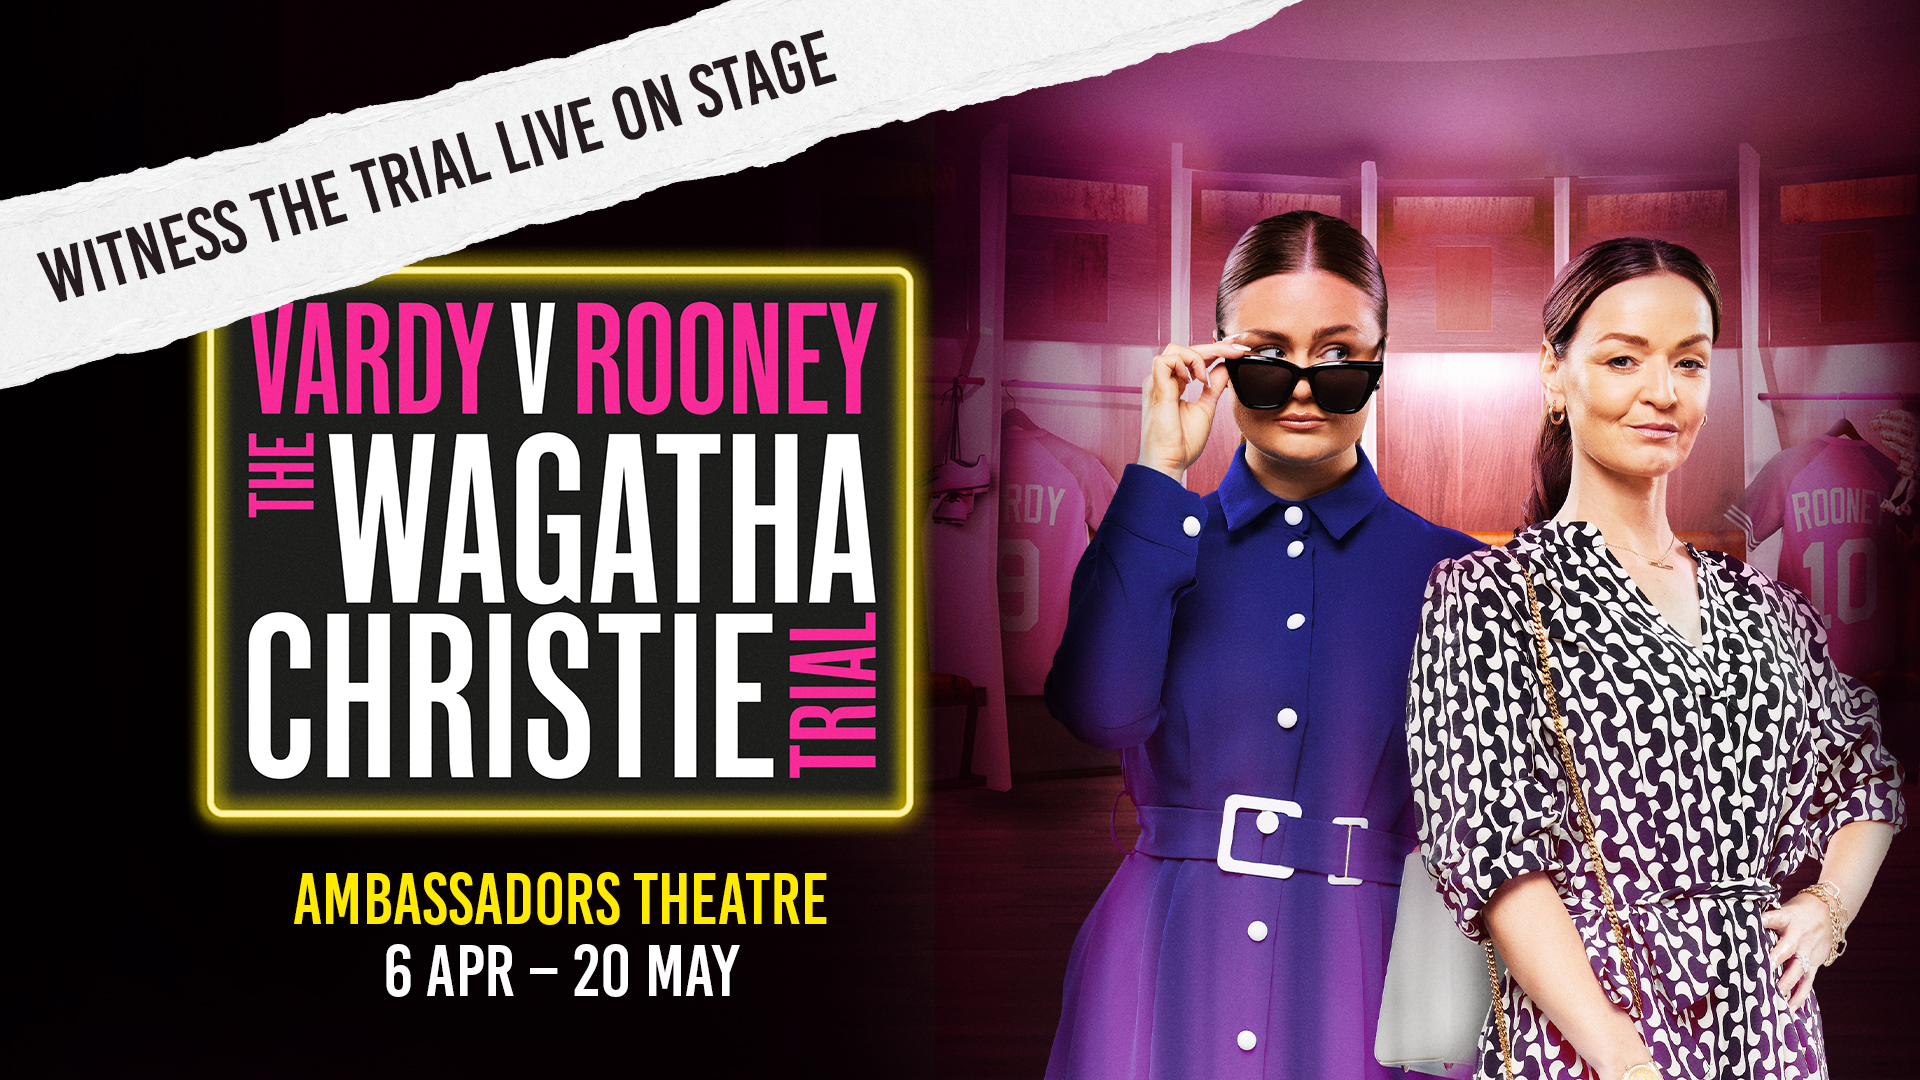 Vardy V Rooney: The Wagatha Christie Trial Tickets | Ambassadors Theatre in  London West End | ATG Tickets